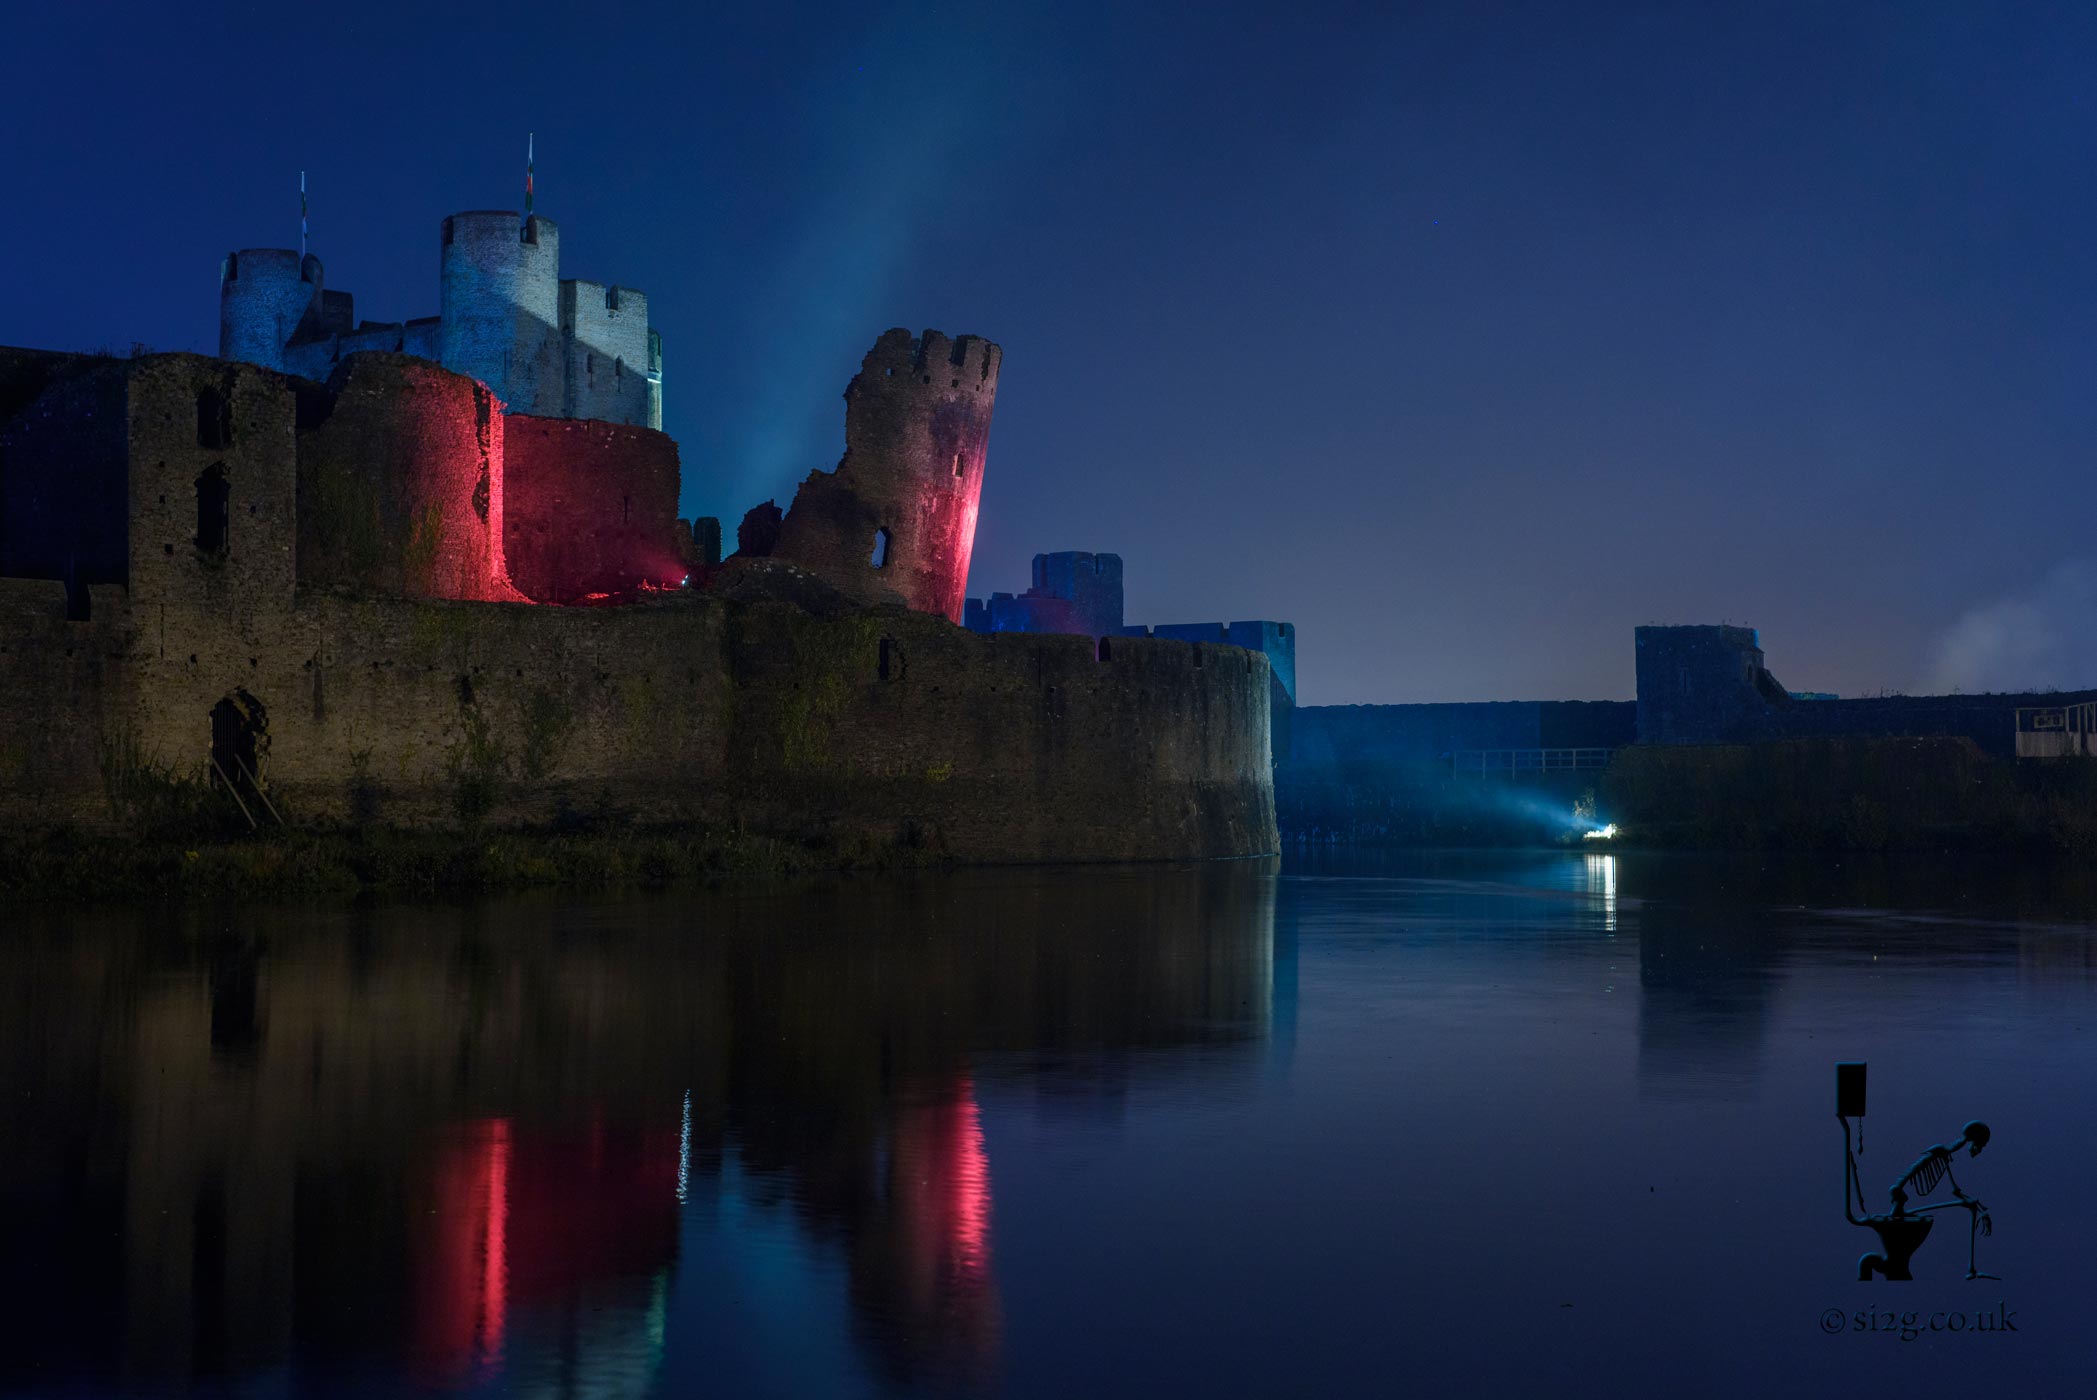 Caerphilly Illuminated - Part of a series of Welsh Tourism photos this striking image is of one of Wales most impressive castles - Caerphilly Castle.  South Wales has more castles per square mile than anywhere else in Europe.  The most cost-effective way to visit them all is become a member of Cadw, the historic environment service working for an accessible and well-protected historic environment for Wales. 